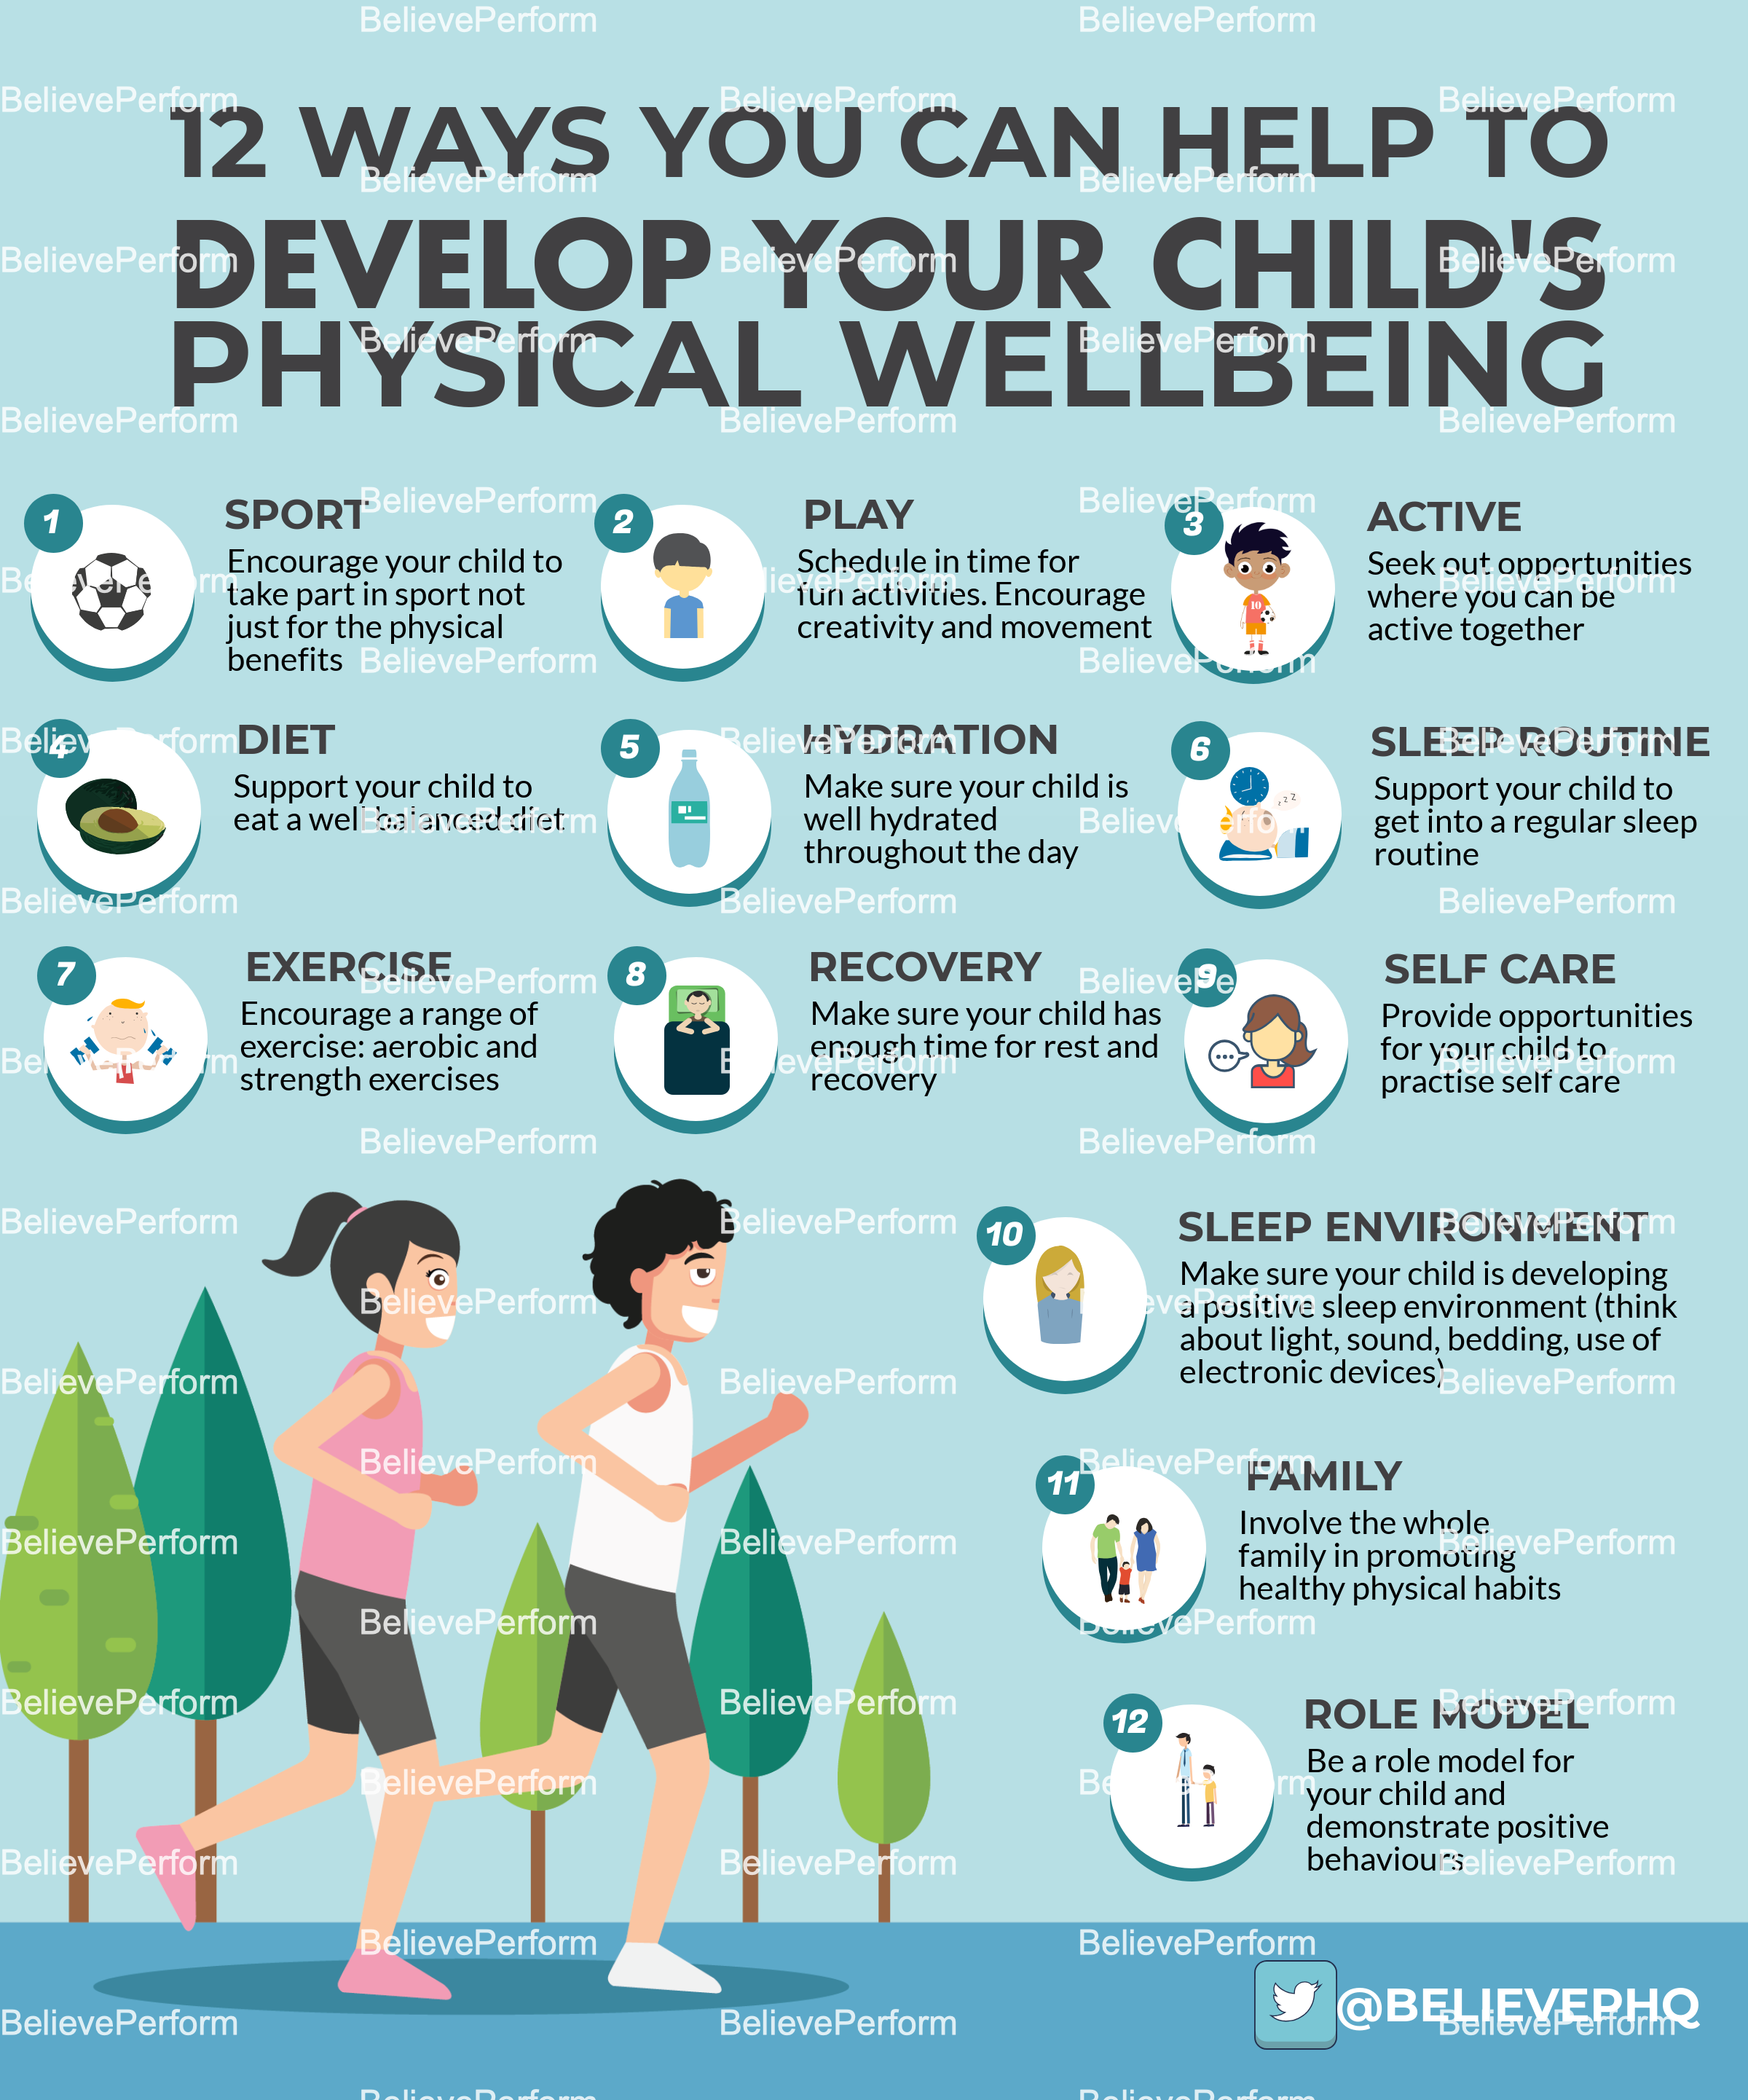 12 ways you can help to develop your child's physical